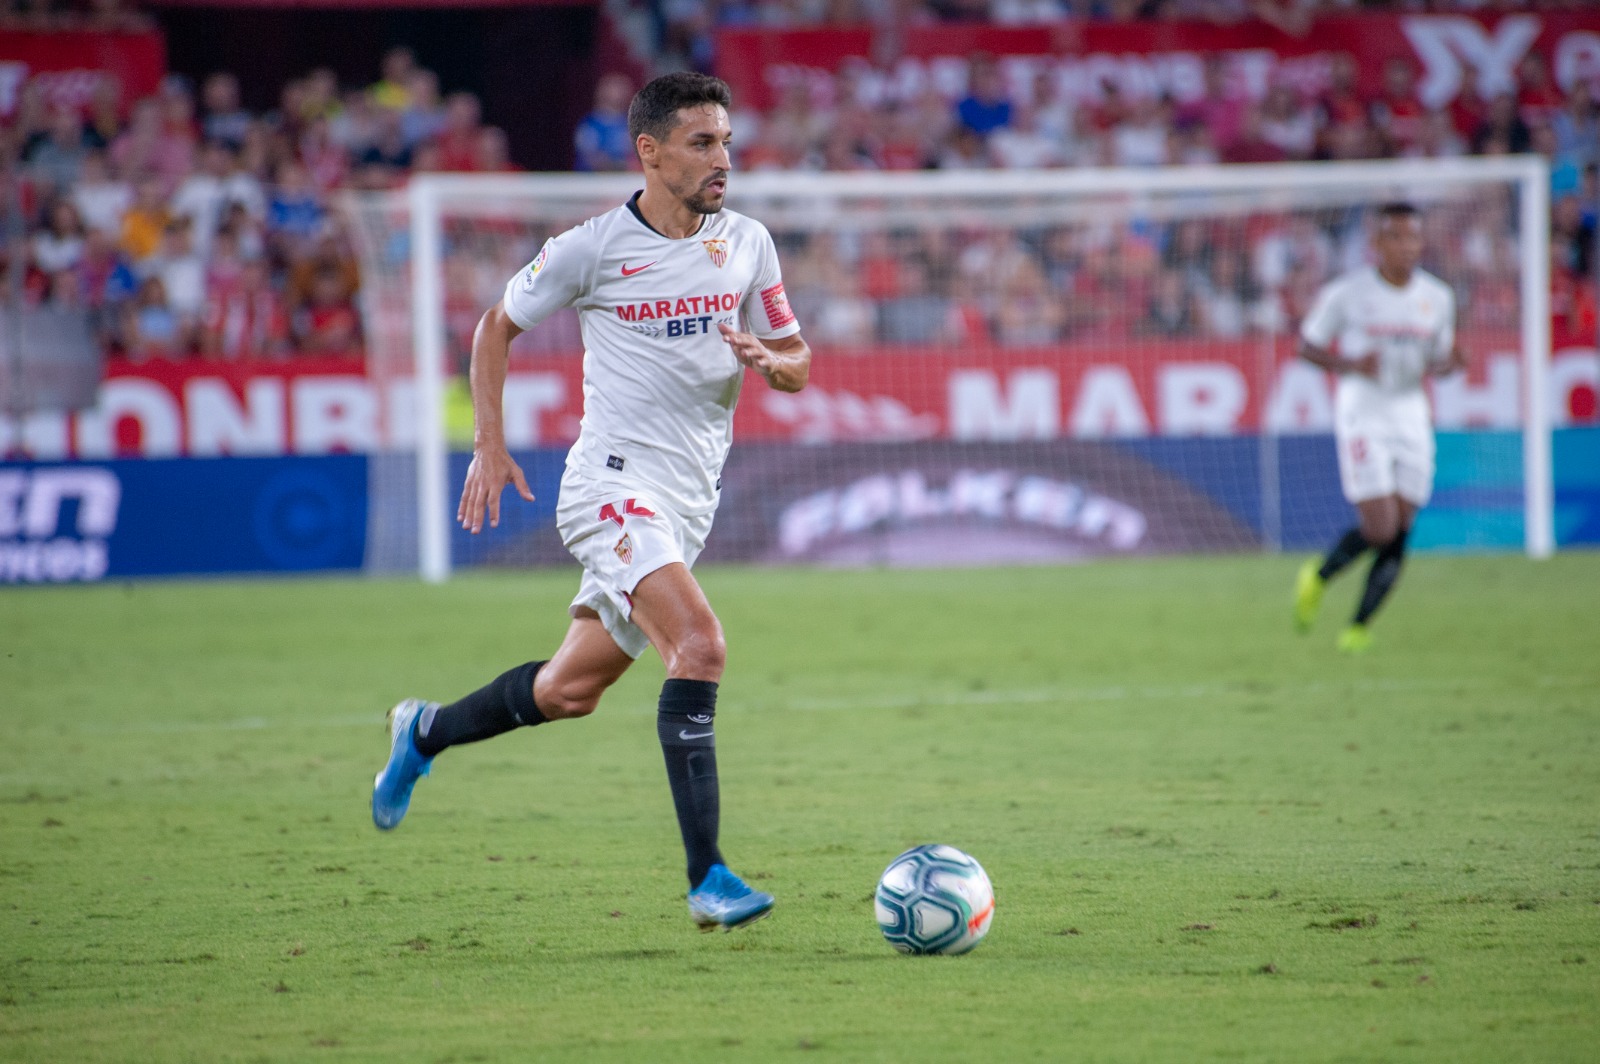 Jesus Navas Reaches 350 Appearances In The Top Flight The Second Player To Do So For Sevilla Fc Sevilla Fc